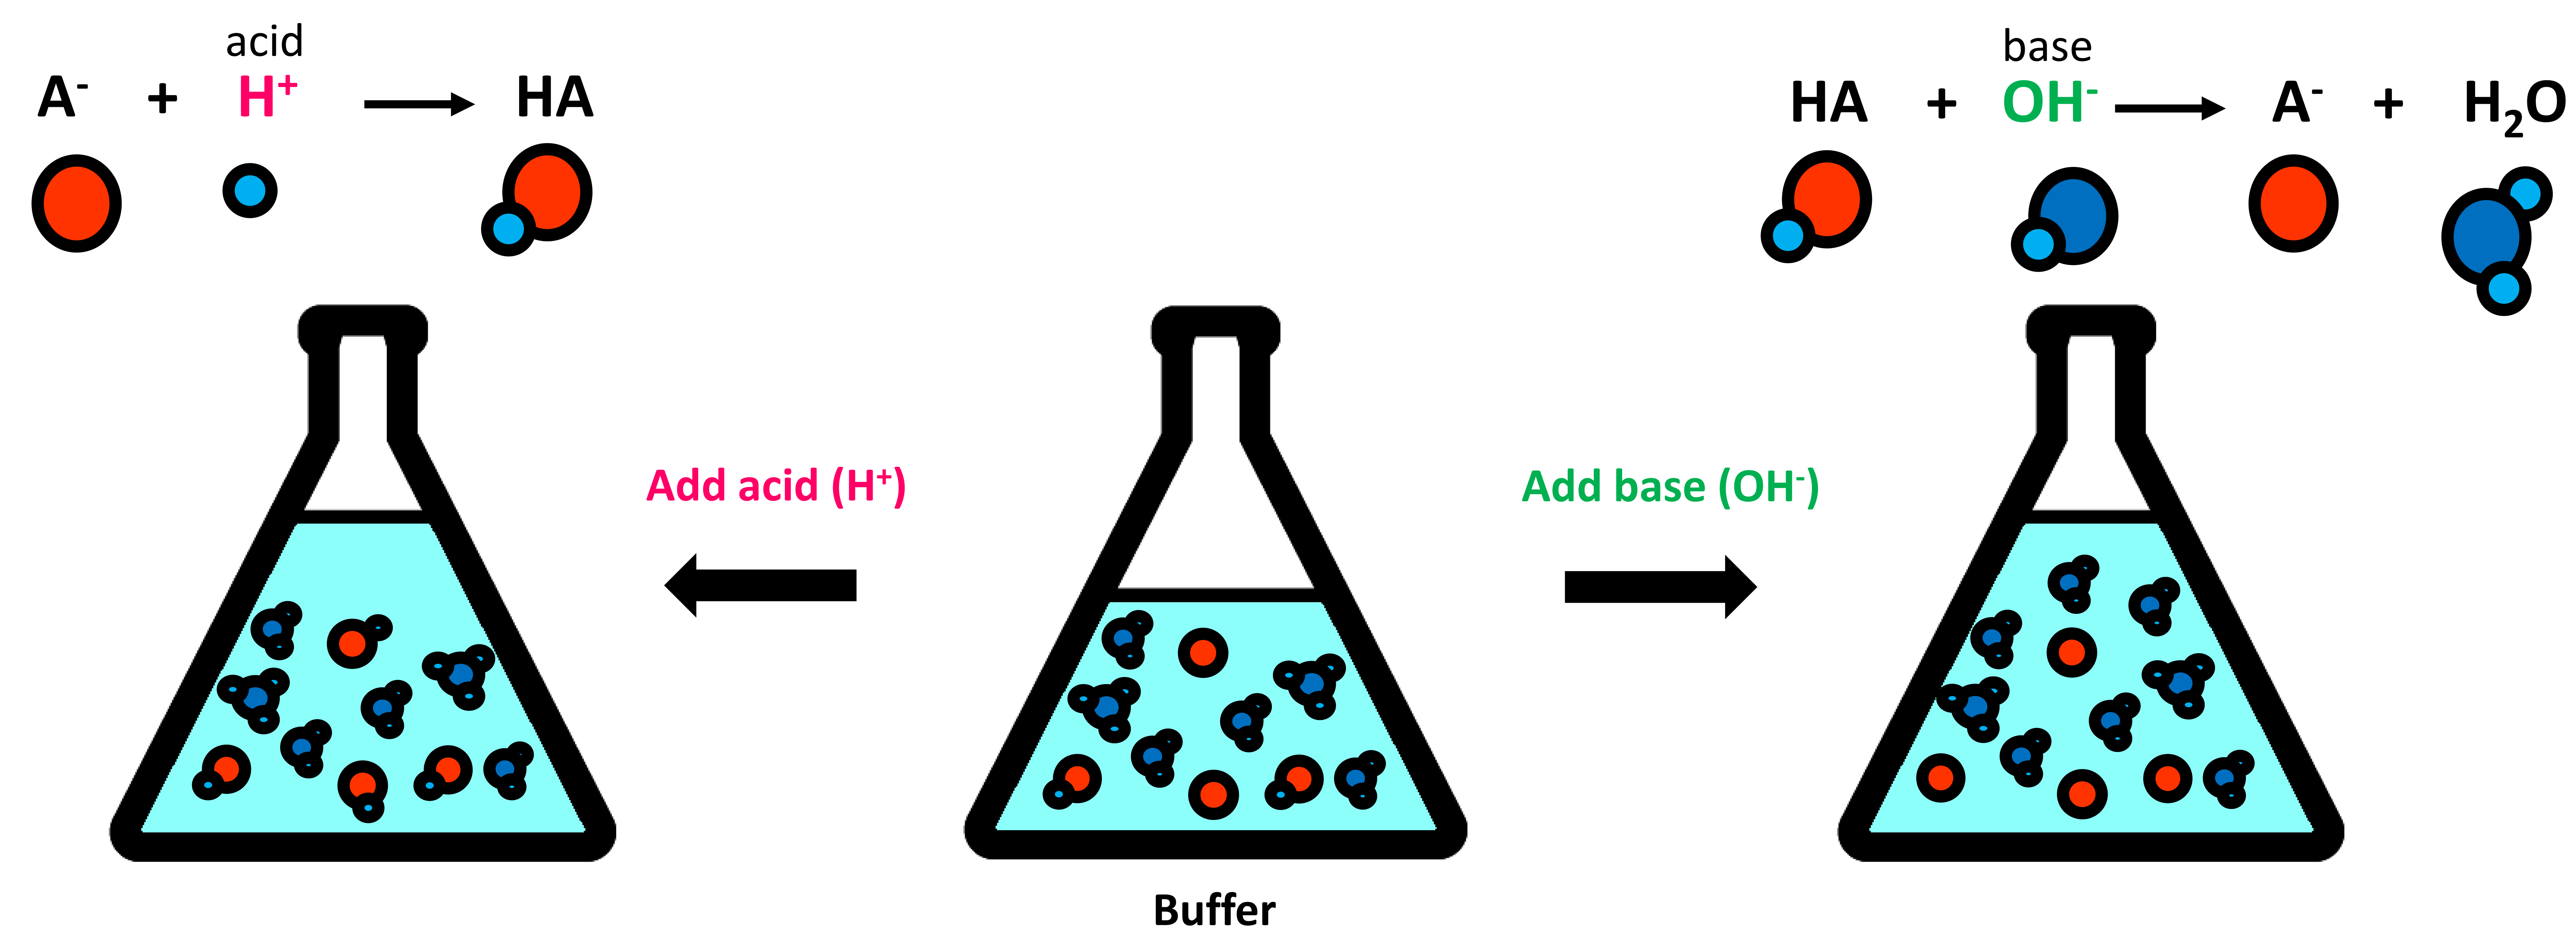 how buffers work picture, illustration of how buffers neutralize acids and bases, chemistry of how buffers work to neutralize acids and bases